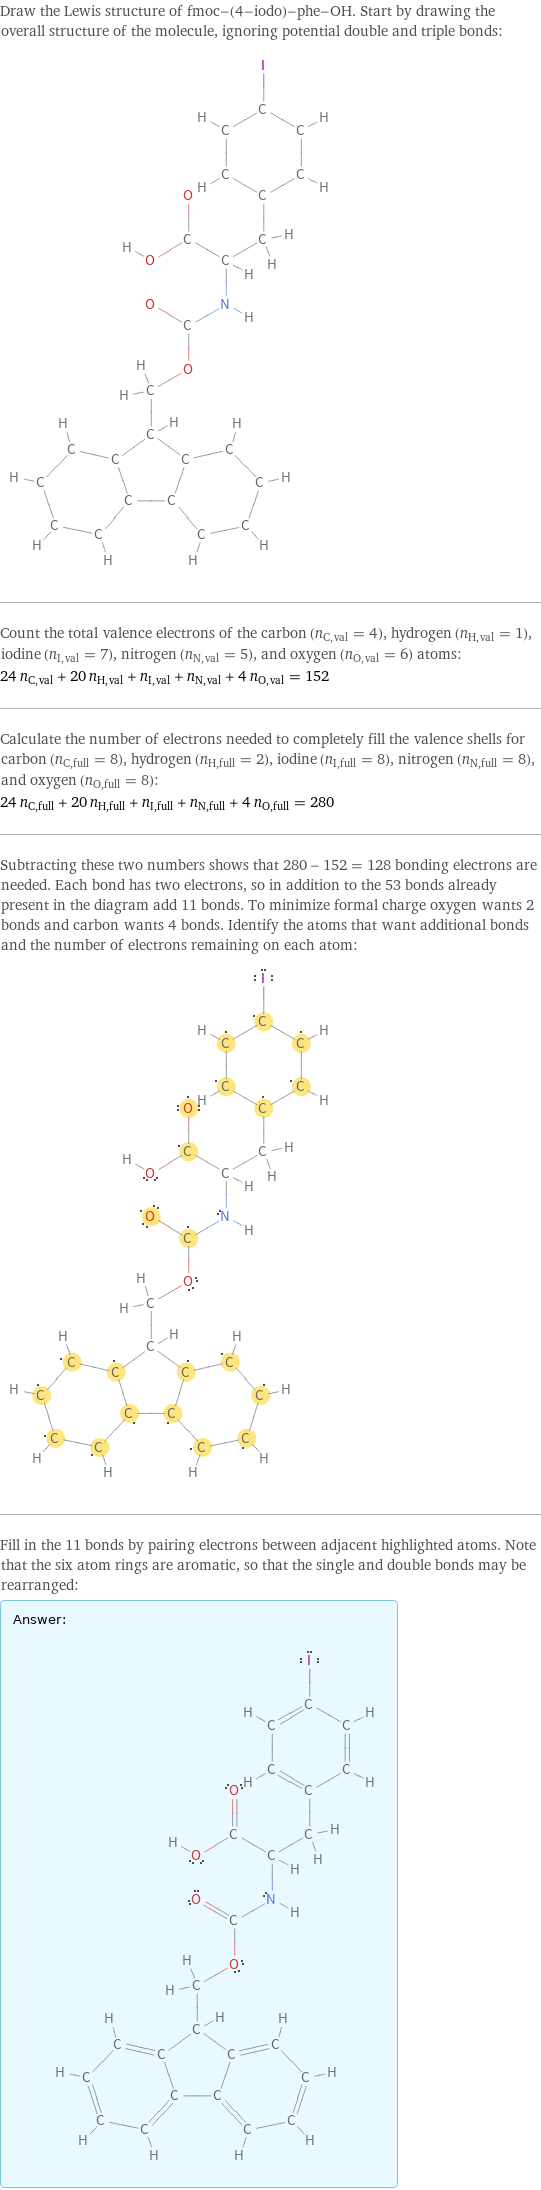 Draw the Lewis structure of fmoc-(4-iodo)-phe-OH. Start by drawing the overall structure of the molecule, ignoring potential double and triple bonds:  Count the total valence electrons of the carbon (n_C, val = 4), hydrogen (n_H, val = 1), iodine (n_I, val = 7), nitrogen (n_N, val = 5), and oxygen (n_O, val = 6) atoms: 24 n_C, val + 20 n_H, val + n_I, val + n_N, val + 4 n_O, val = 152 Calculate the number of electrons needed to completely fill the valence shells for carbon (n_C, full = 8), hydrogen (n_H, full = 2), iodine (n_I, full = 8), nitrogen (n_N, full = 8), and oxygen (n_O, full = 8): 24 n_C, full + 20 n_H, full + n_I, full + n_N, full + 4 n_O, full = 280 Subtracting these two numbers shows that 280 - 152 = 128 bonding electrons are needed. Each bond has two electrons, so in addition to the 53 bonds already present in the diagram add 11 bonds. To minimize formal charge oxygen wants 2 bonds and carbon wants 4 bonds. Identify the atoms that want additional bonds and the number of electrons remaining on each atom:  Fill in the 11 bonds by pairing electrons between adjacent highlighted atoms. Note that the six atom rings are aromatic, so that the single and double bonds may be rearranged: Answer: |   | 